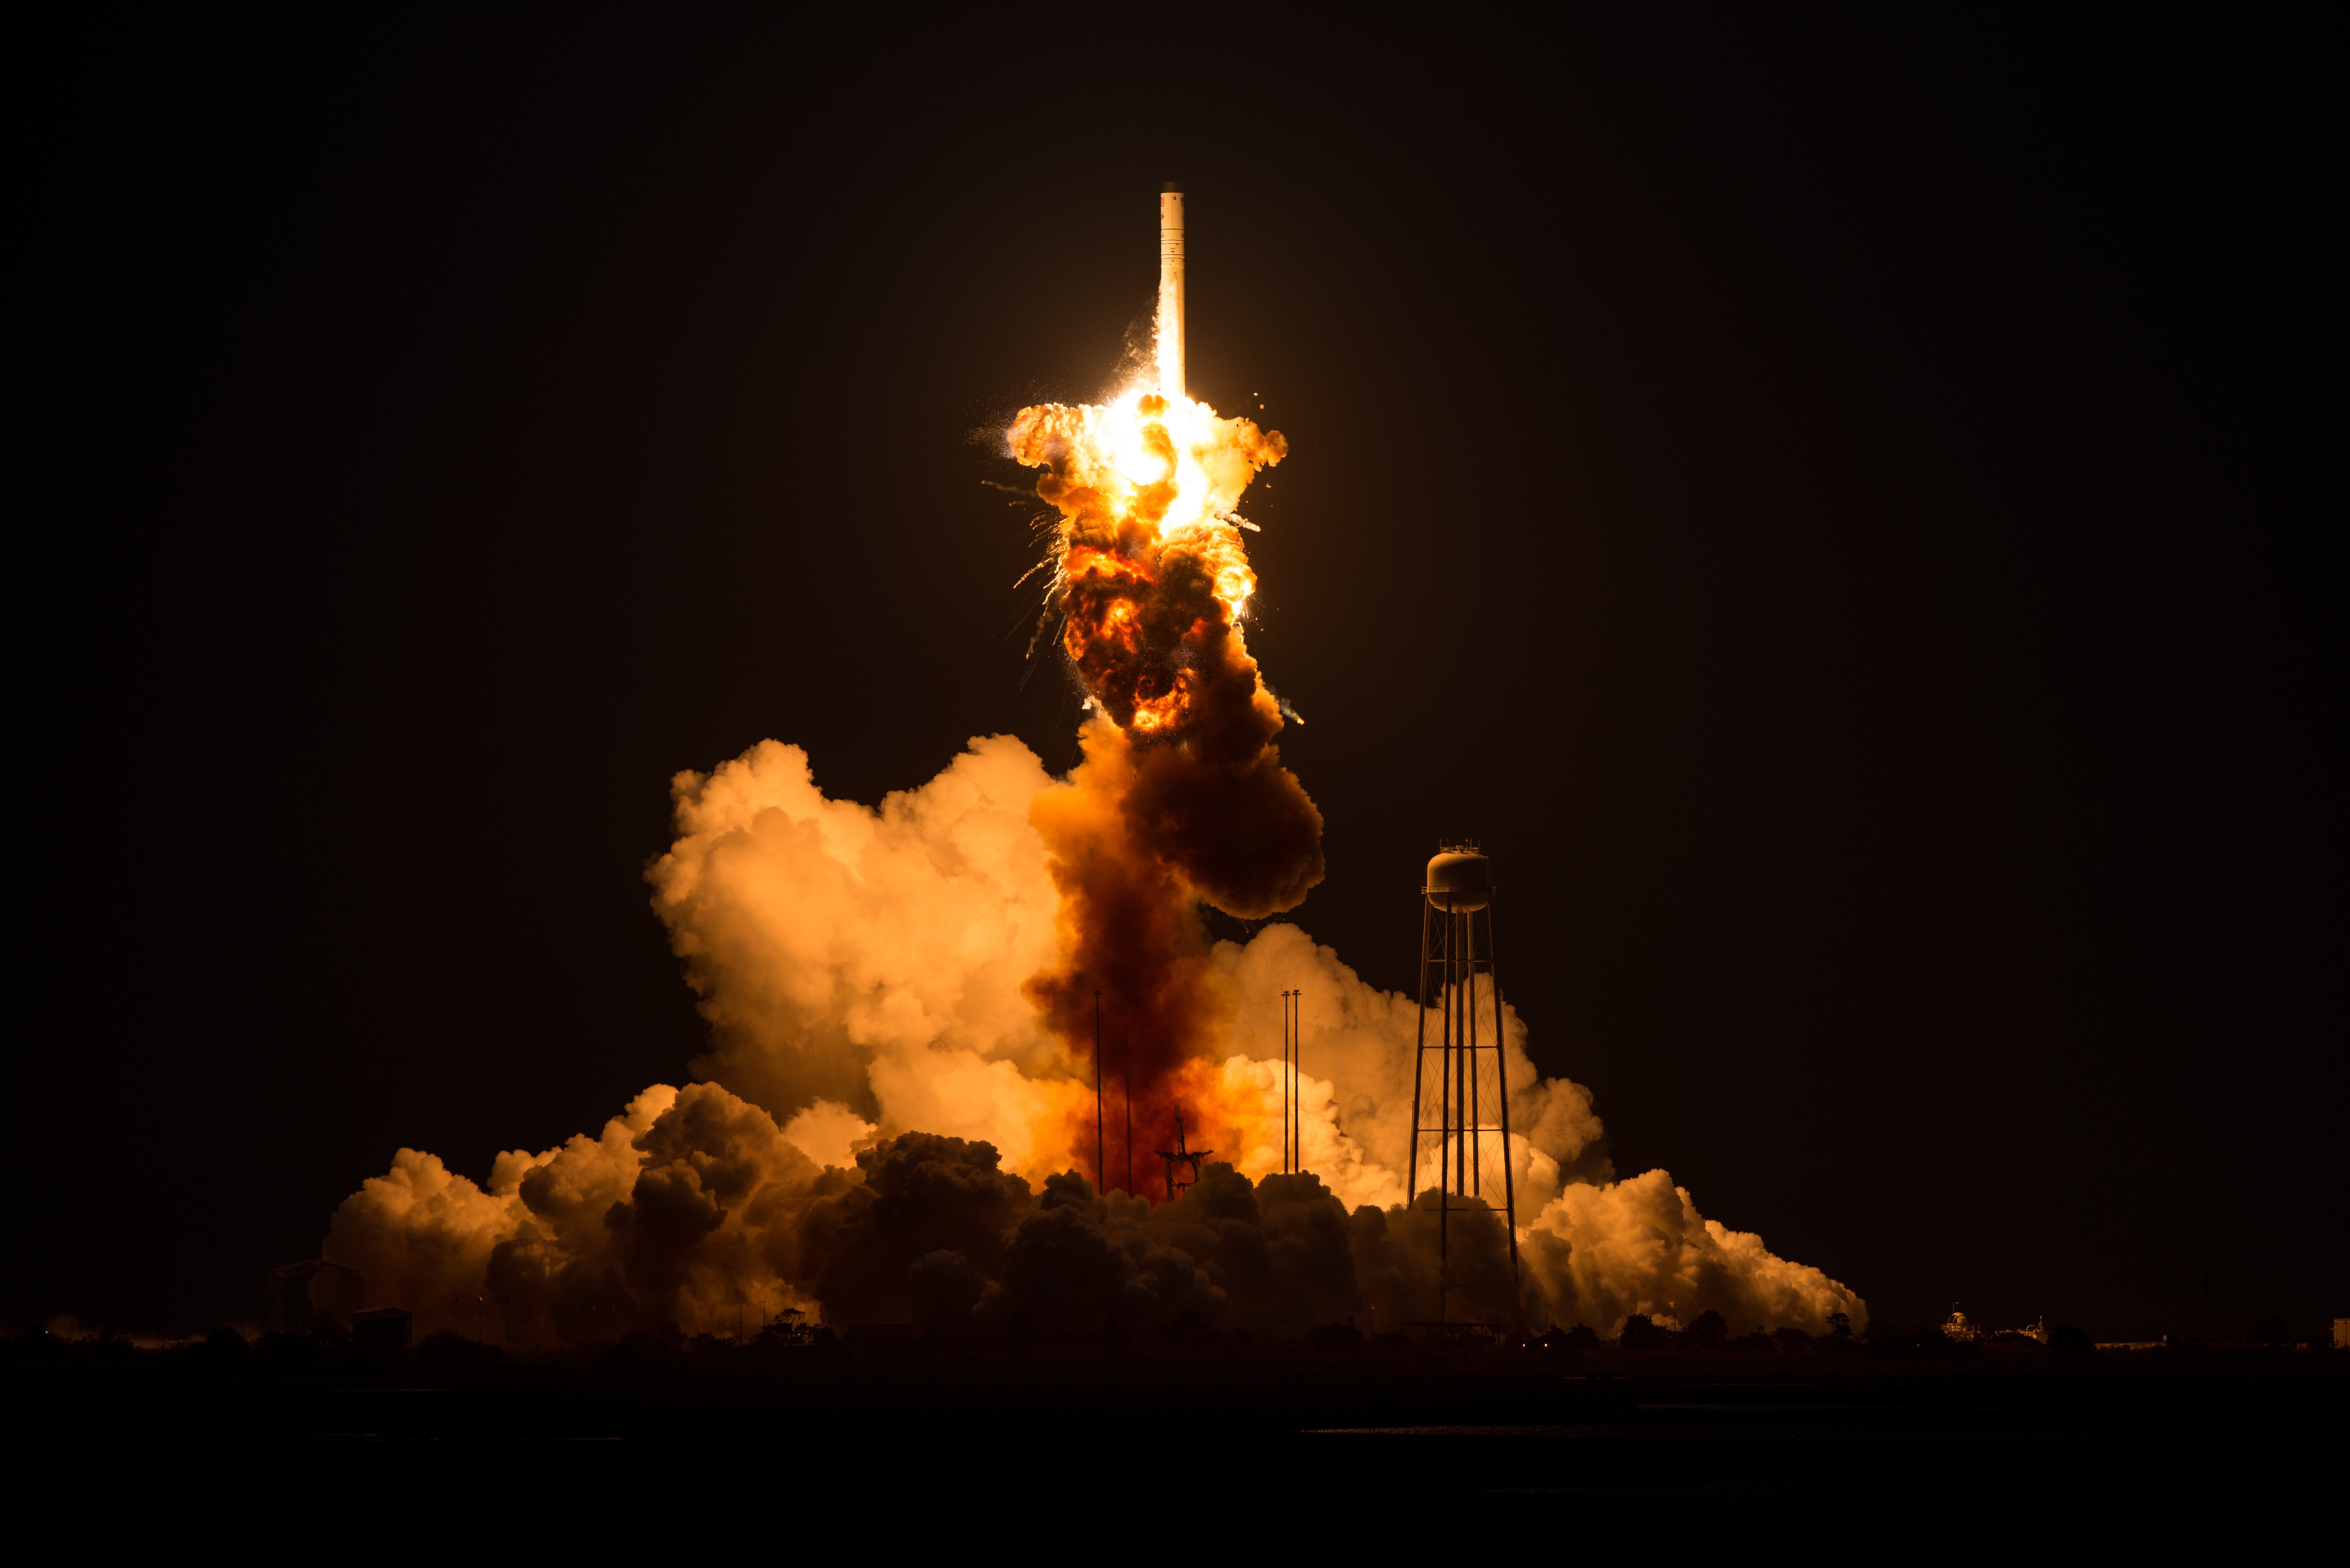 Explosion of the Antares Rocket